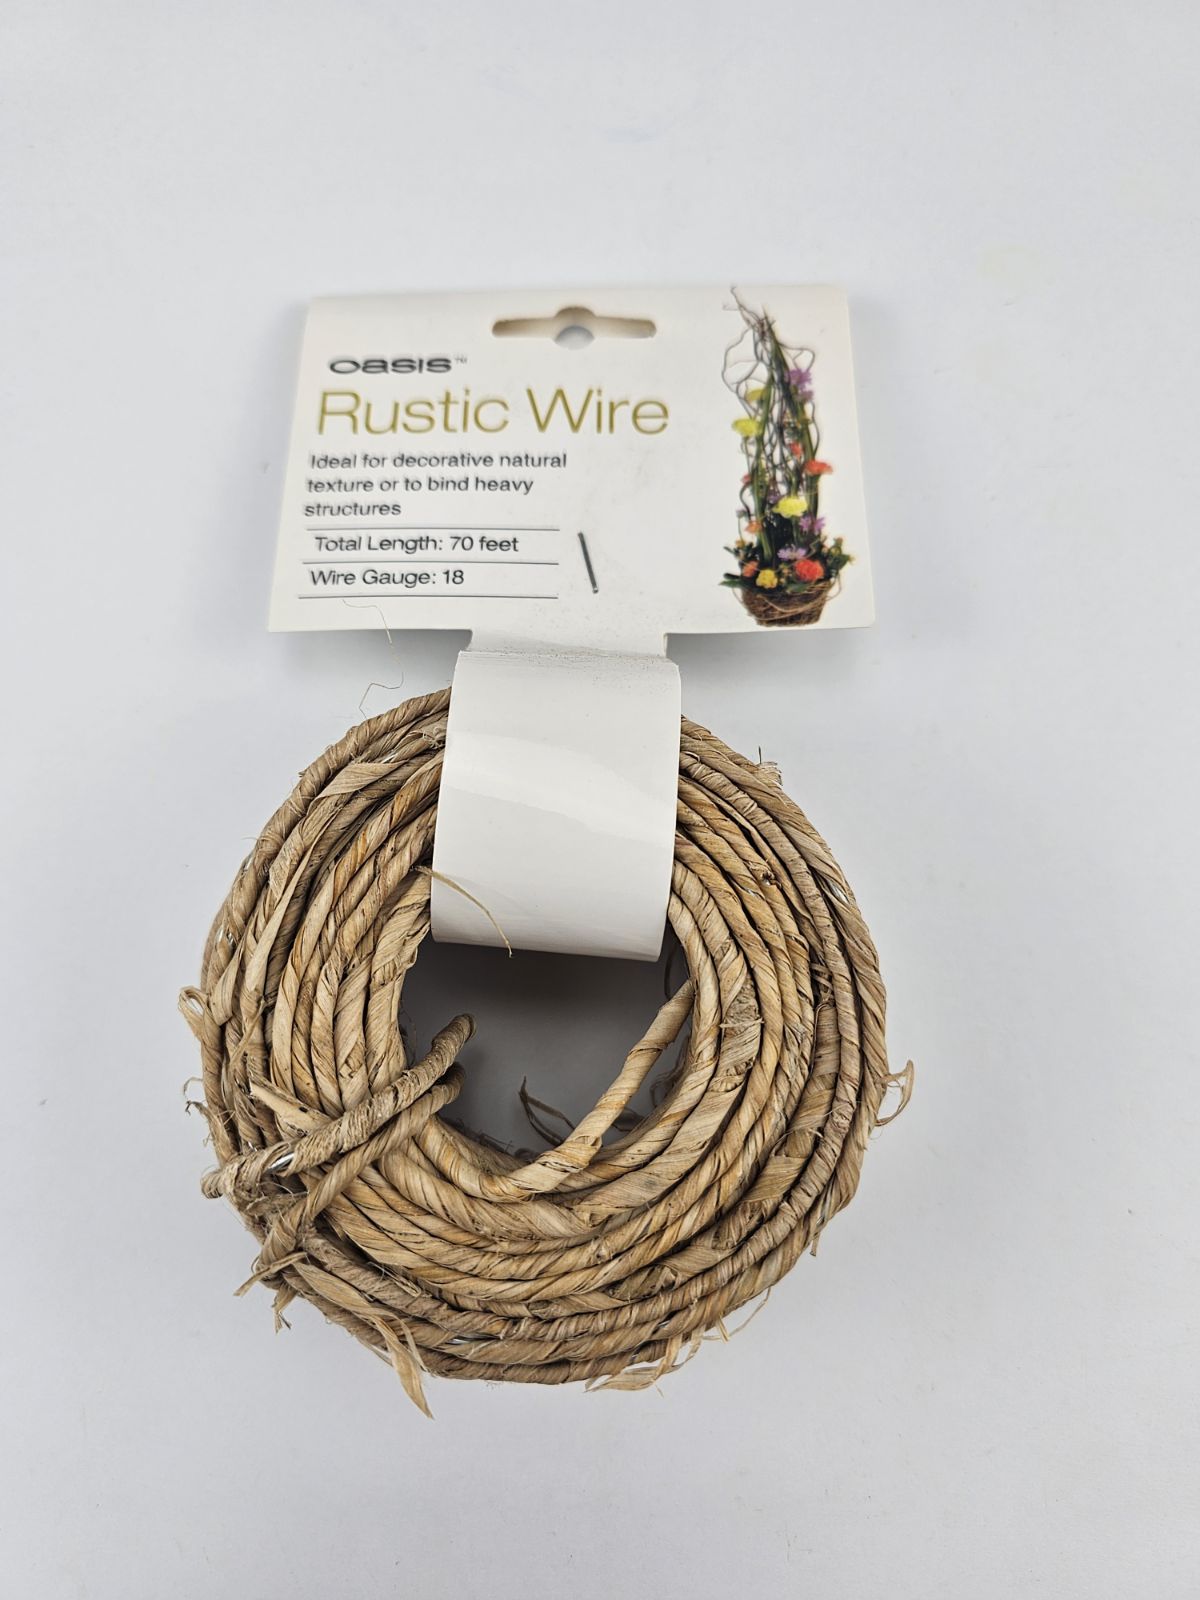 Rustic wire - 70’ - 18 gauge wire - Greenery MarketOasis wire